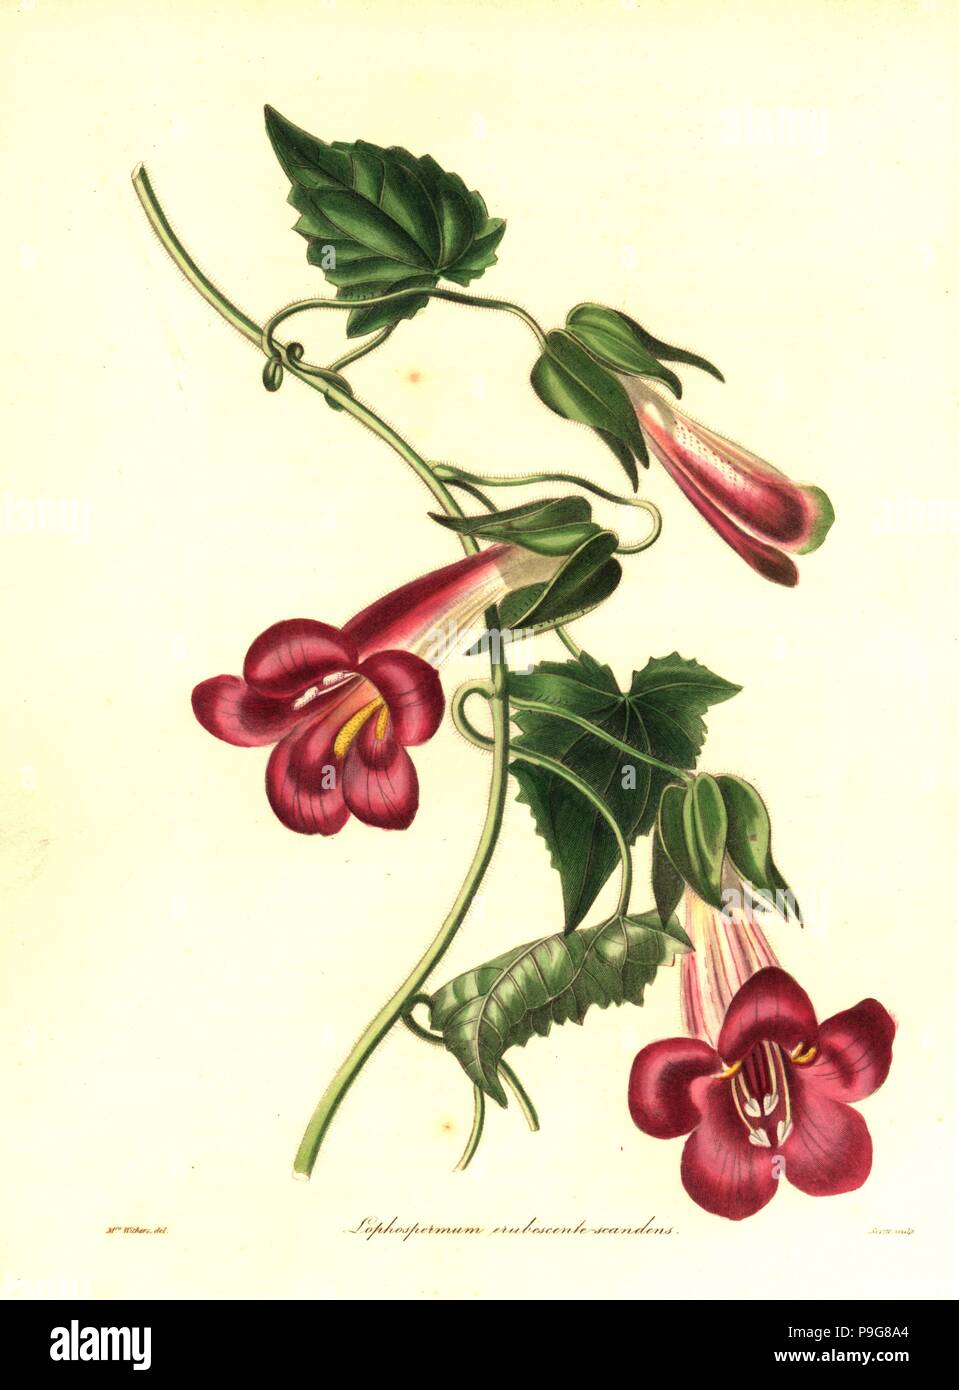 Hybrid climbing lophospermum, Lophospermum erubescente-scandens (Lophospermum erubescens x Lophospermum scandens). Handcoloured copperplate engraving by S. Nevitt after a botanical illustration by Mrs Augusta Withers from Benjamin Maund and the Rev. John Stevens Henslow's The Botanist, London, 1836. Stock Photo